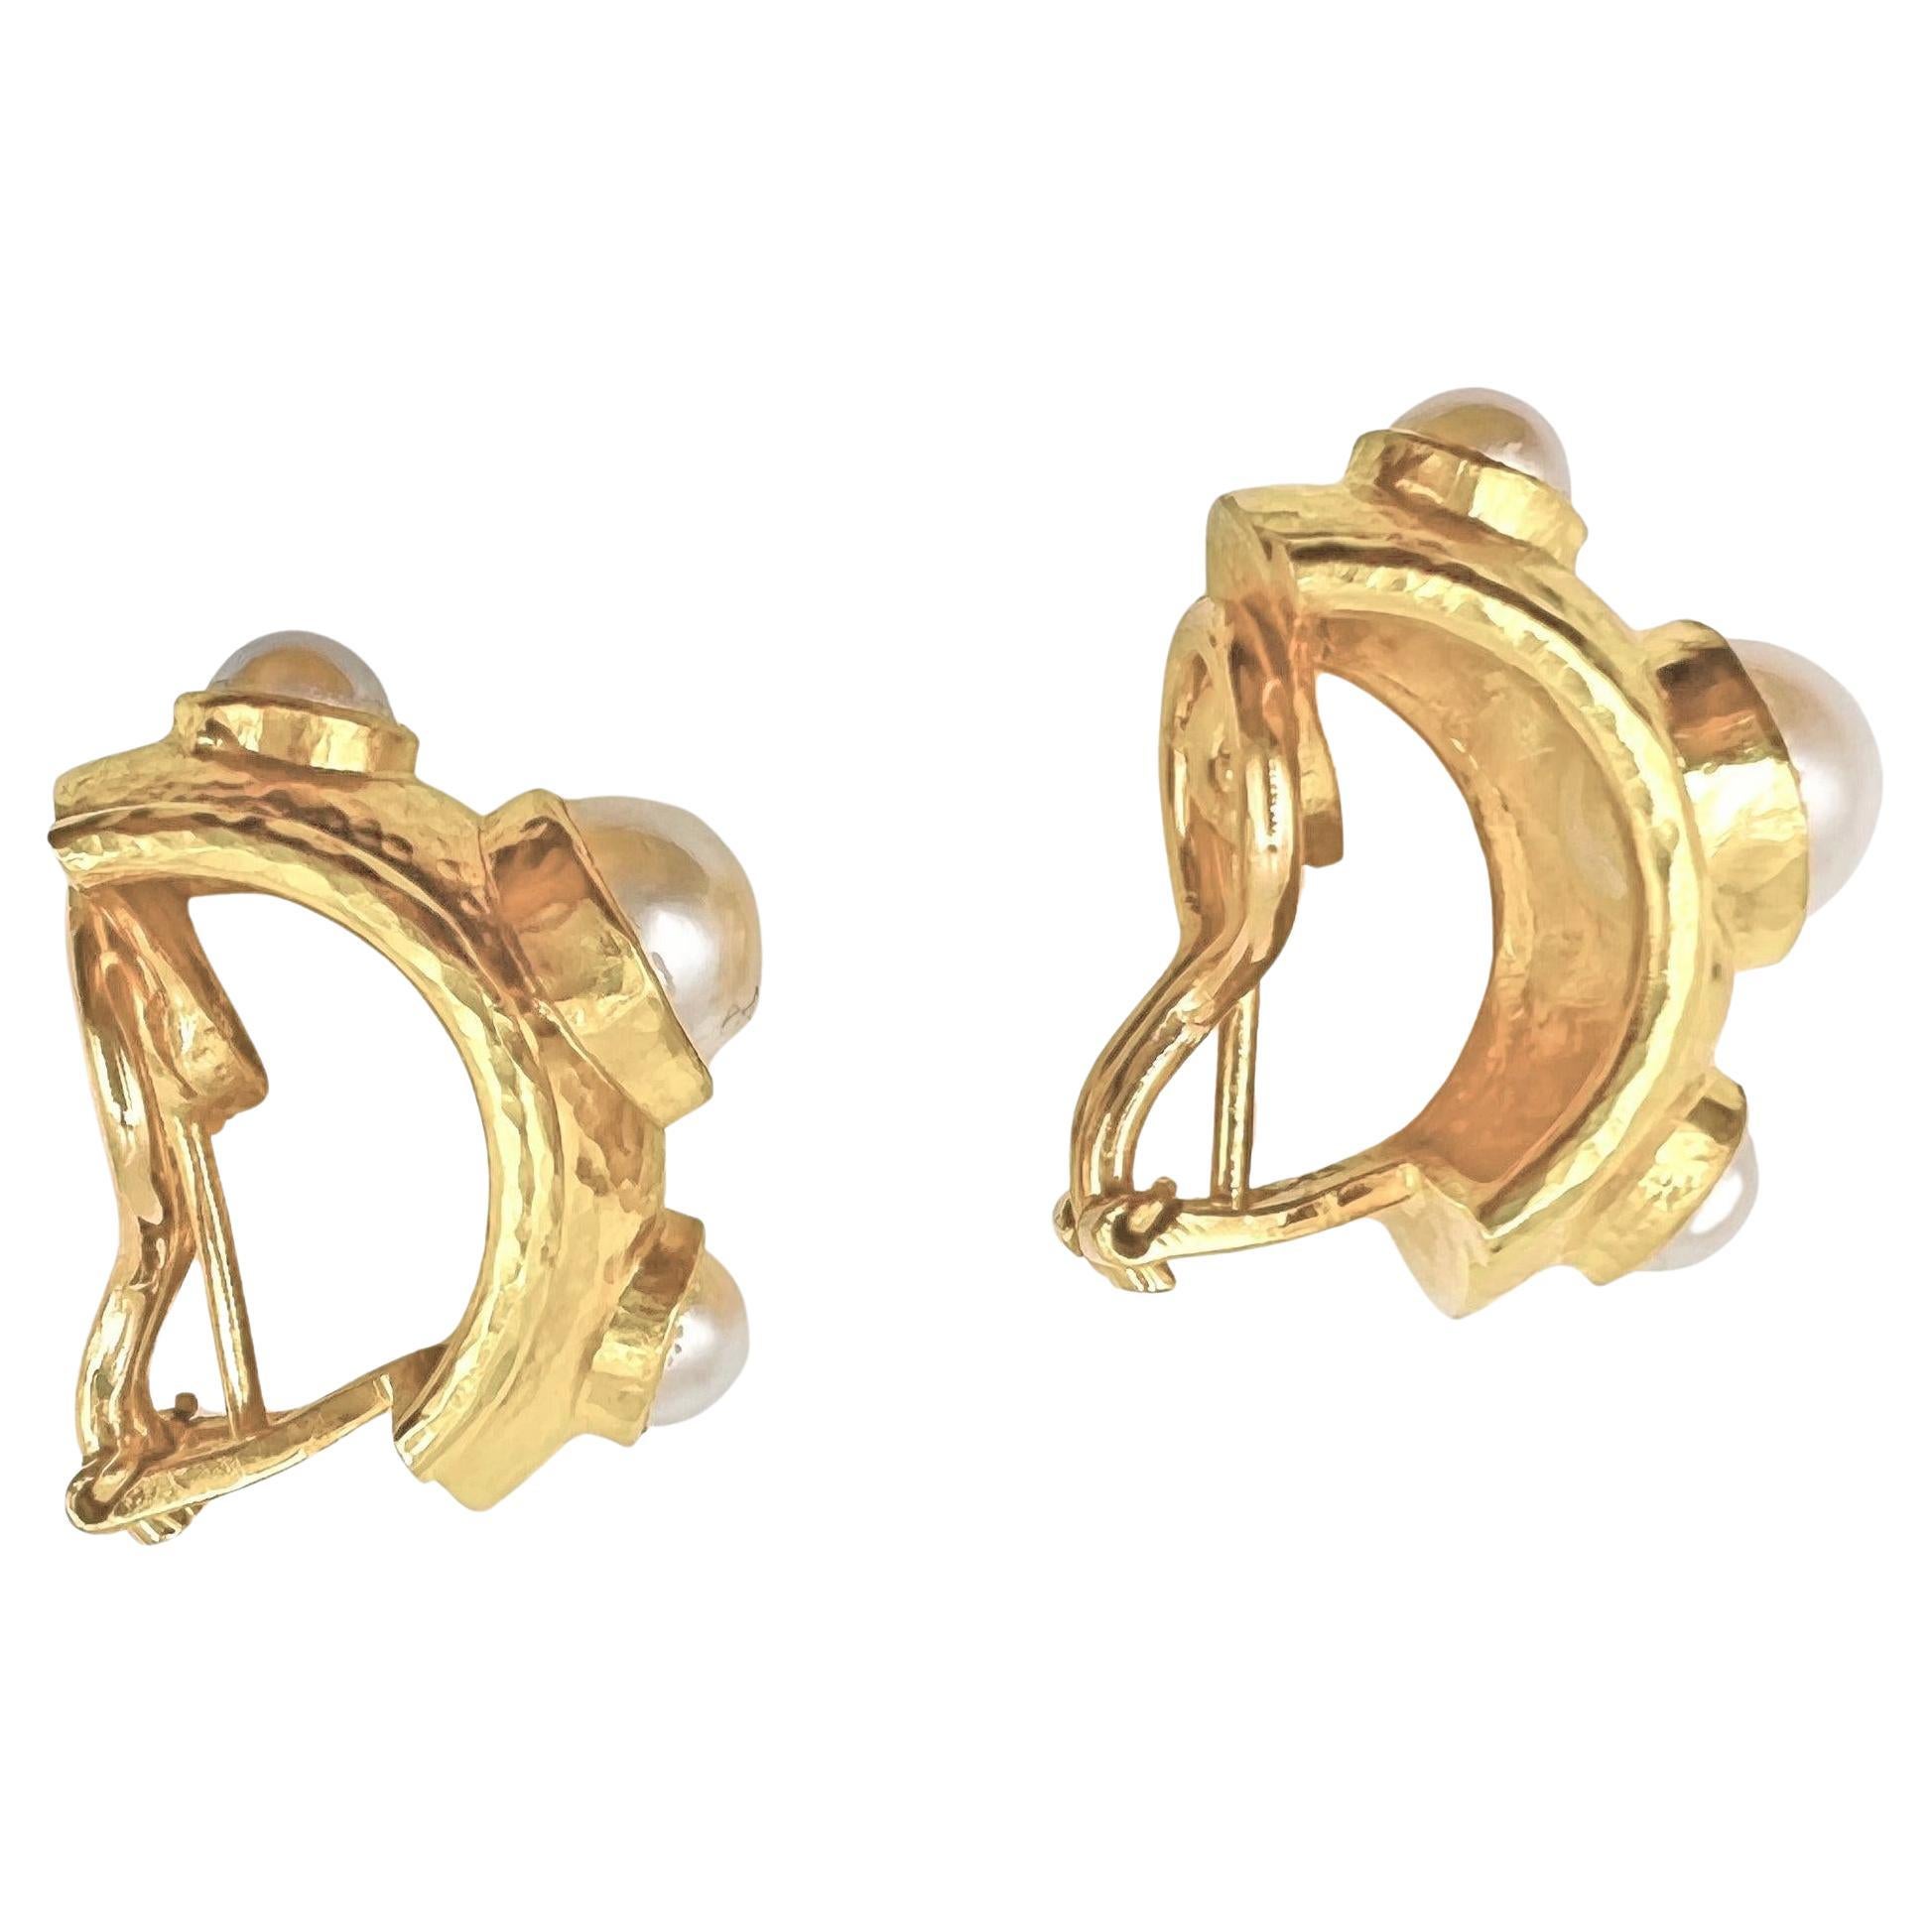 Elizabeth Locke pearl half hoop earrings in 19k yellow gold.  Bezel-set with three half-cultured pearls measuring 5-8mm.  Hammered half hoop design with omega clip backs and optional hinged, fold-down posts for pierced wearers.  Signed 'EL' for